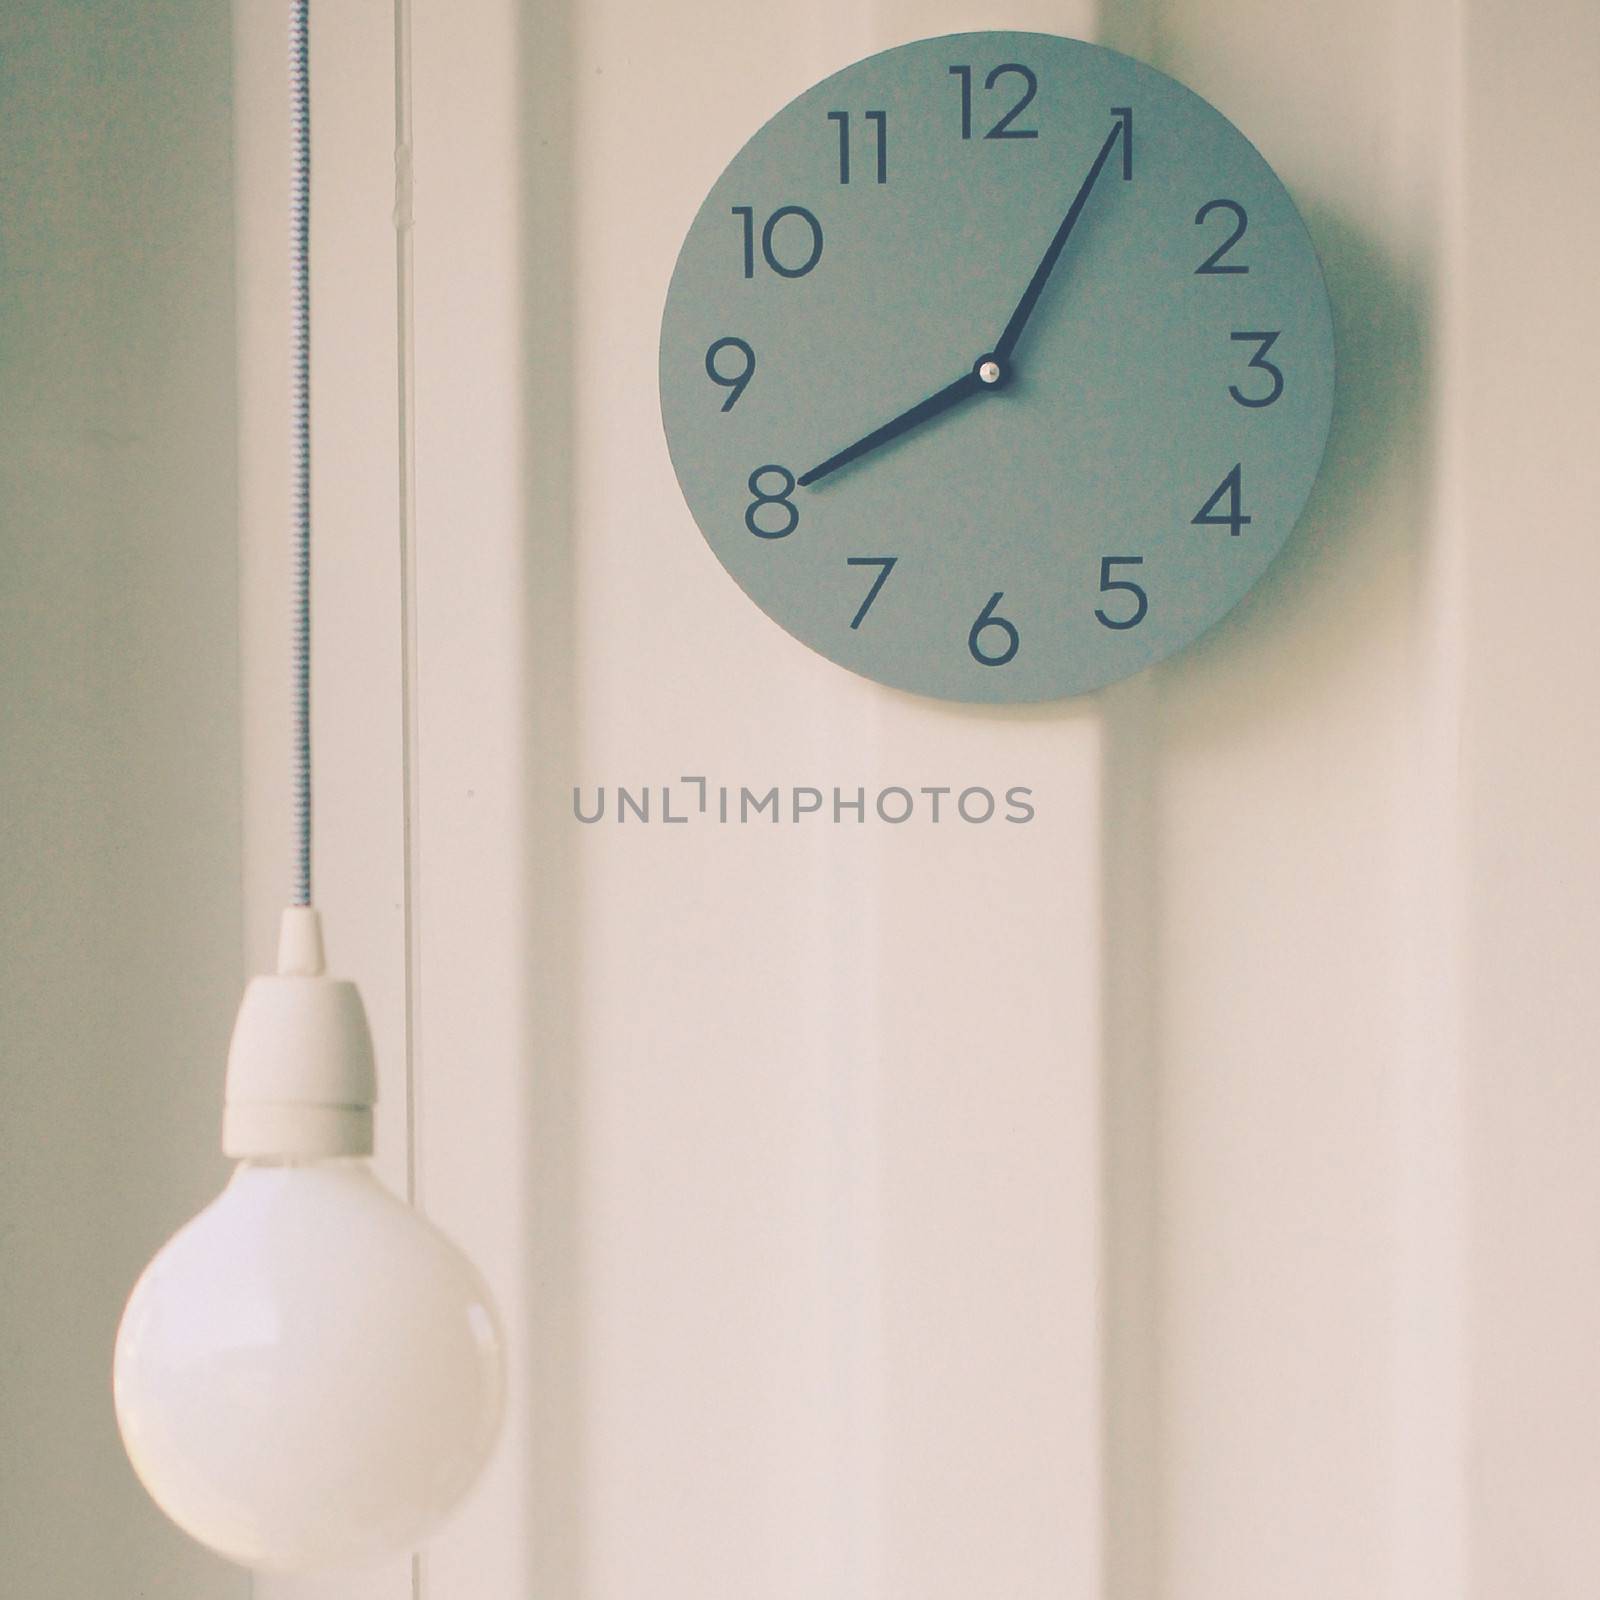 Modern lamp with wall clock, retro filter effect by nuchylee